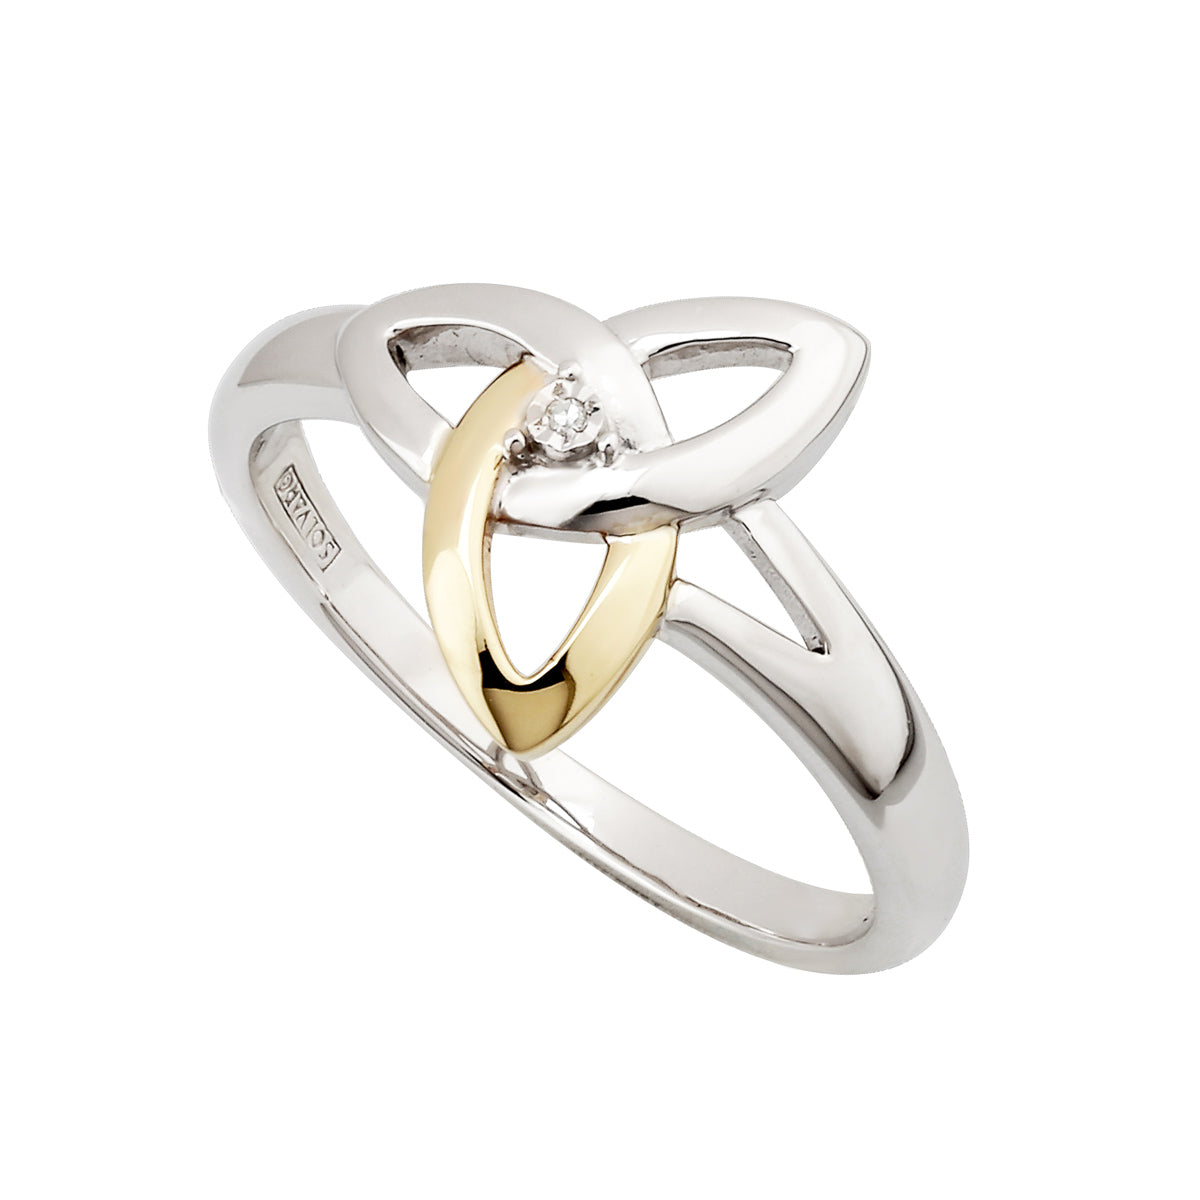 sterling silver and gold diamond trinity knot ring s2977 from Solvar